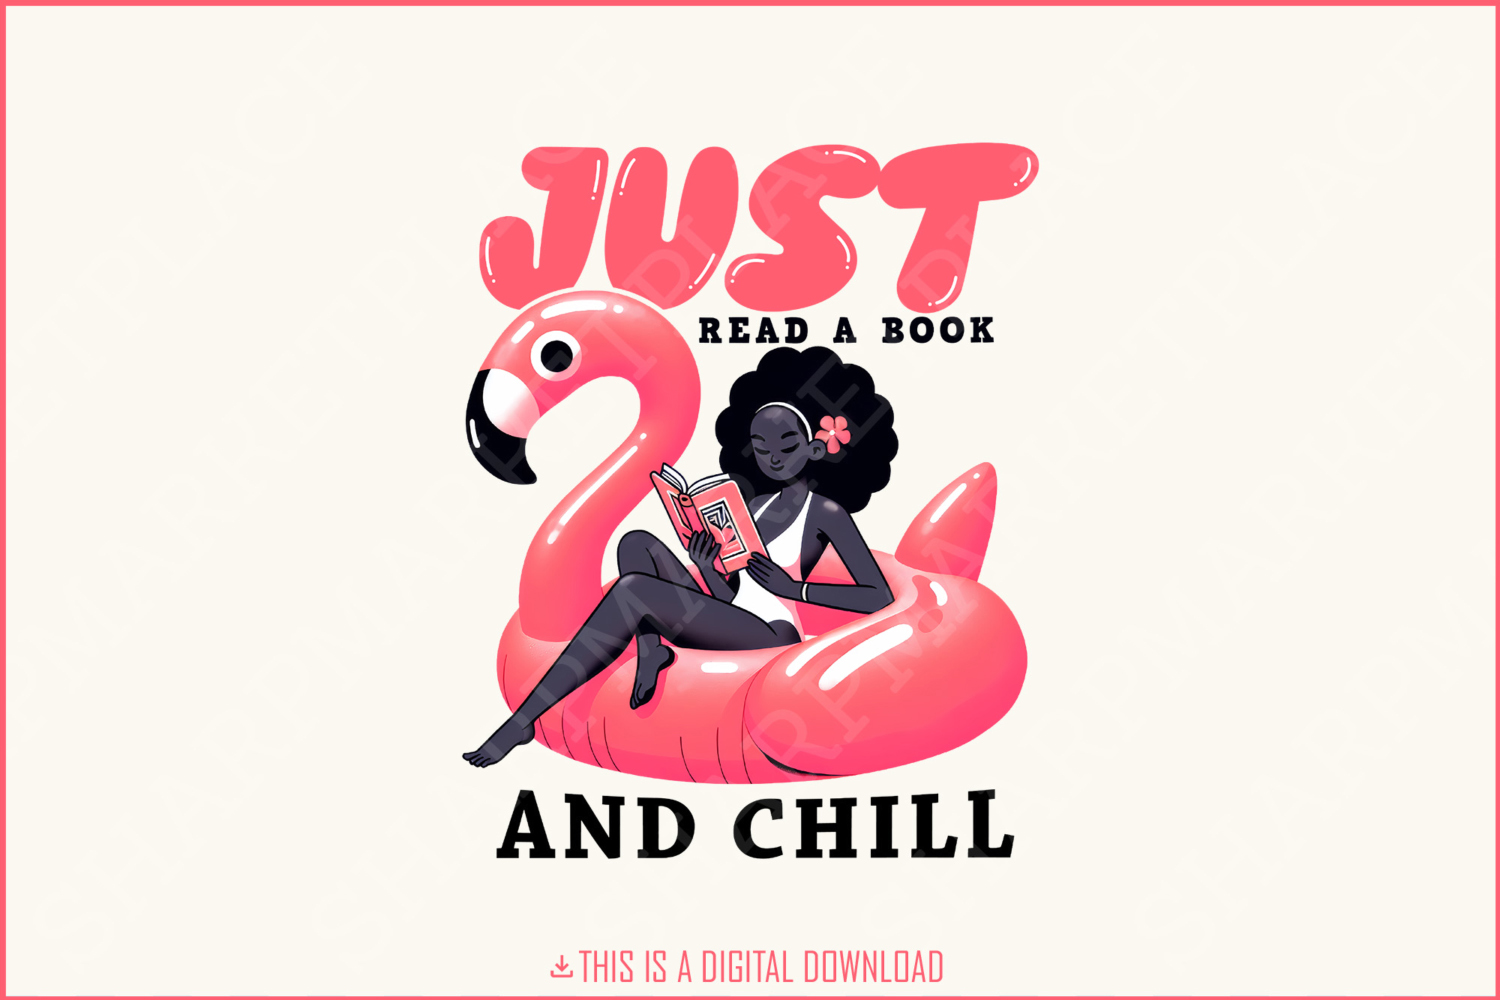 Just Read A Book And Chill PNG, Trendy Bookish Retro Art, Flamingo Float, Summer Reading, Graphic